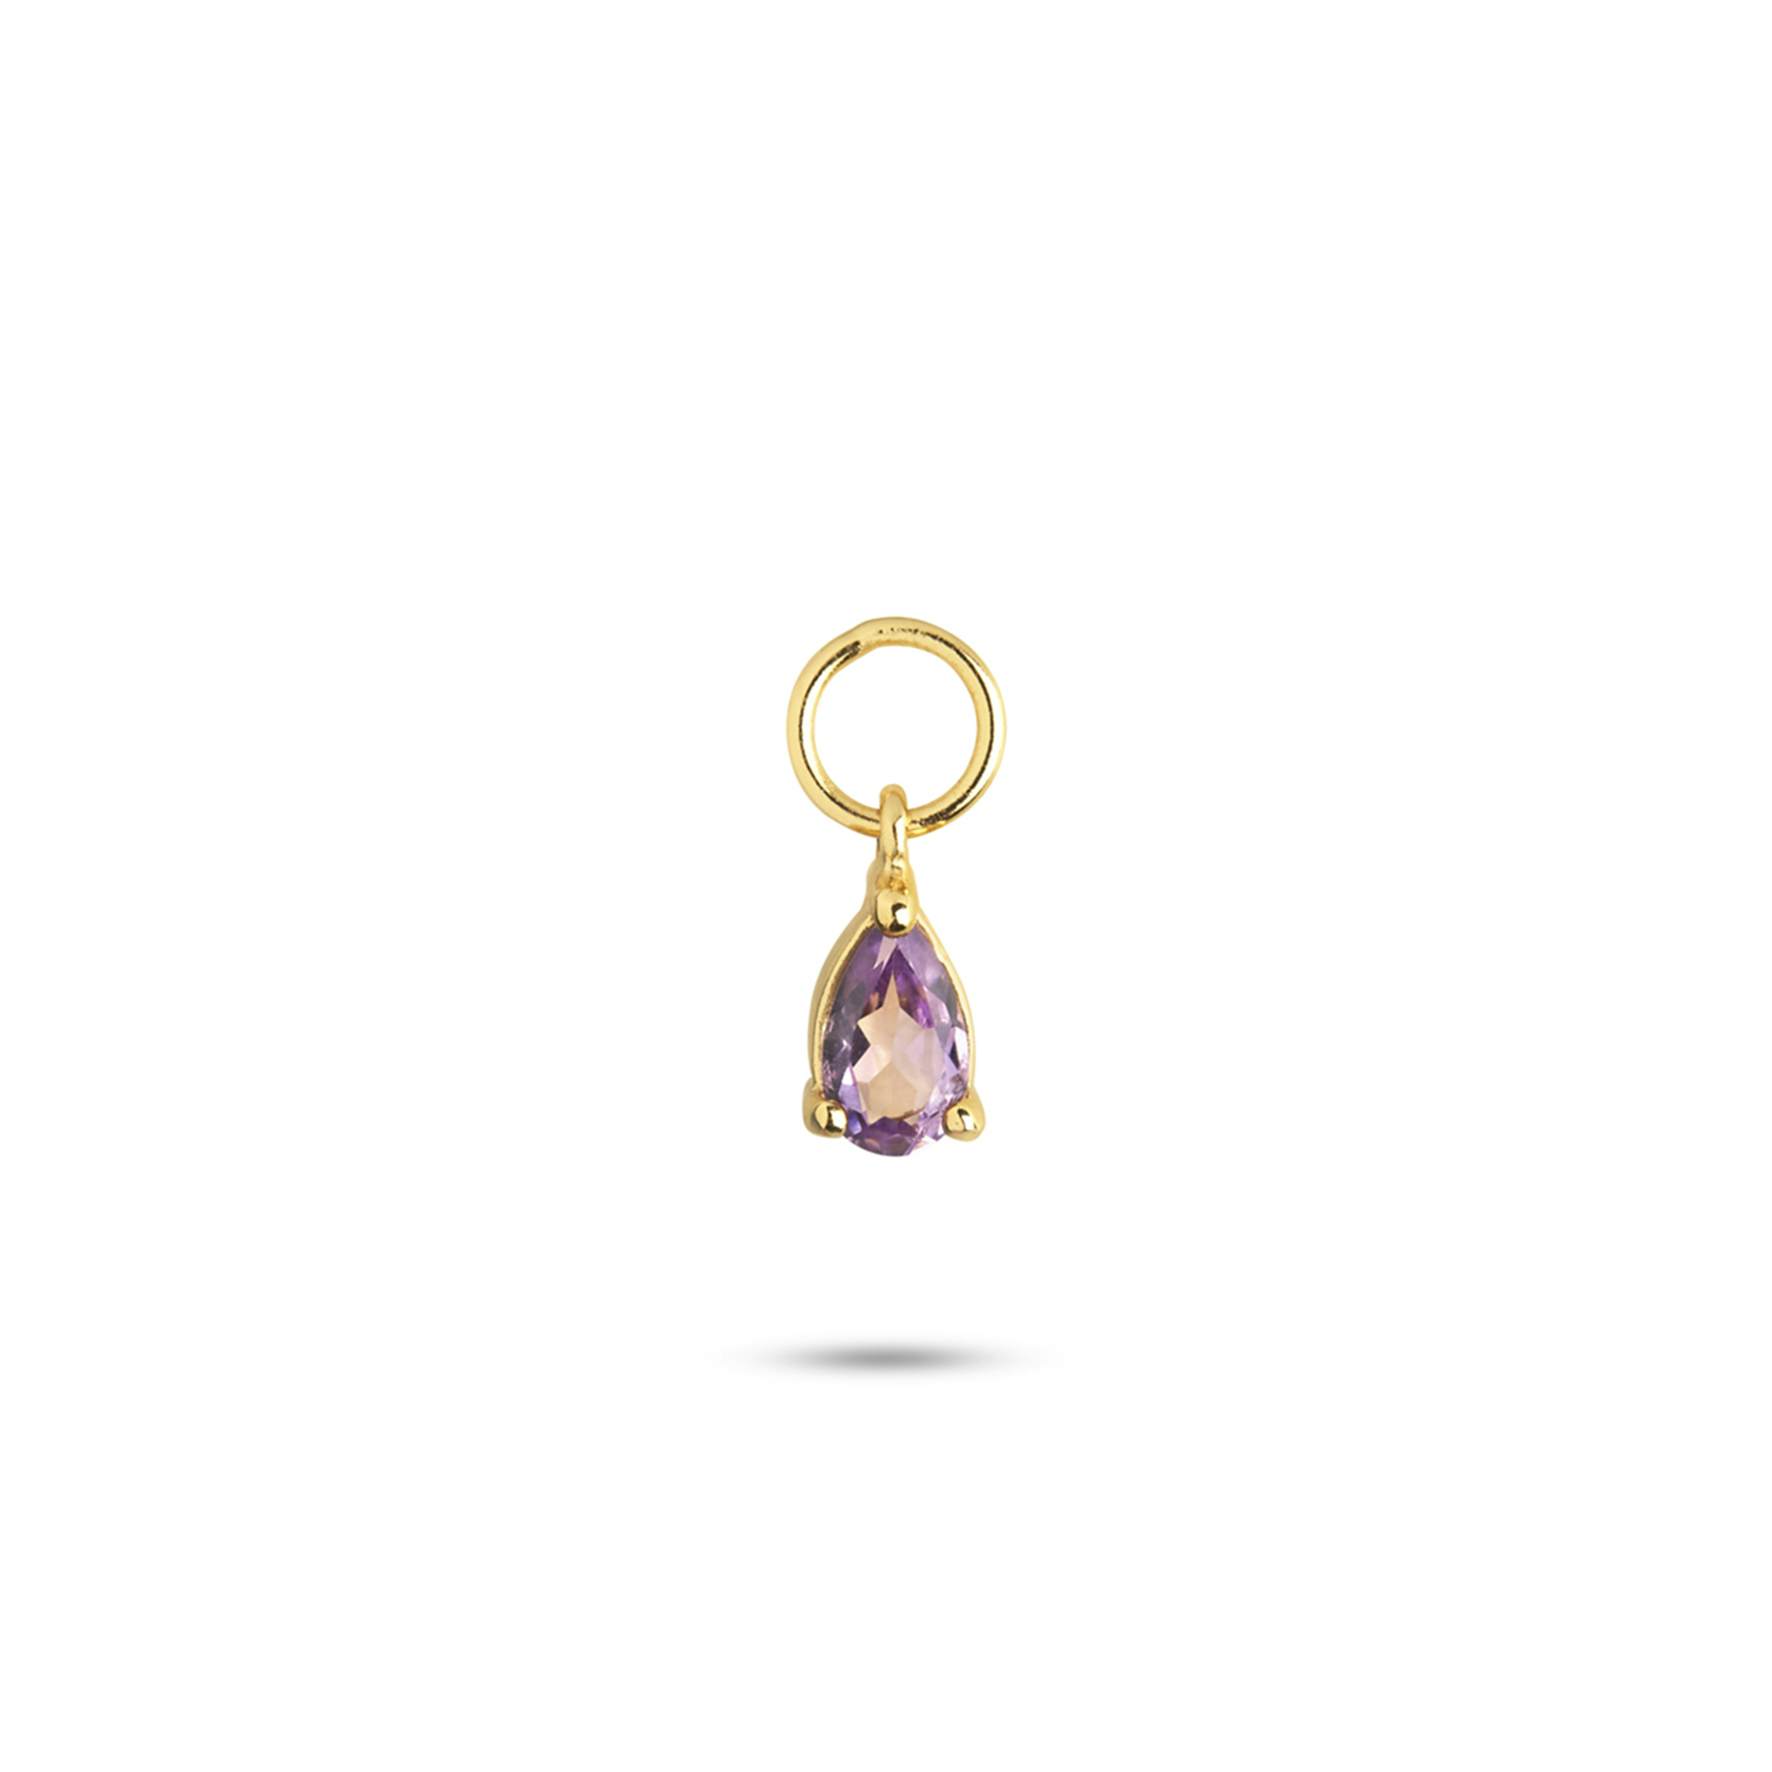 Gem Candy Pendant Valentine from Carré in Goldplated-Silver Sterling 925